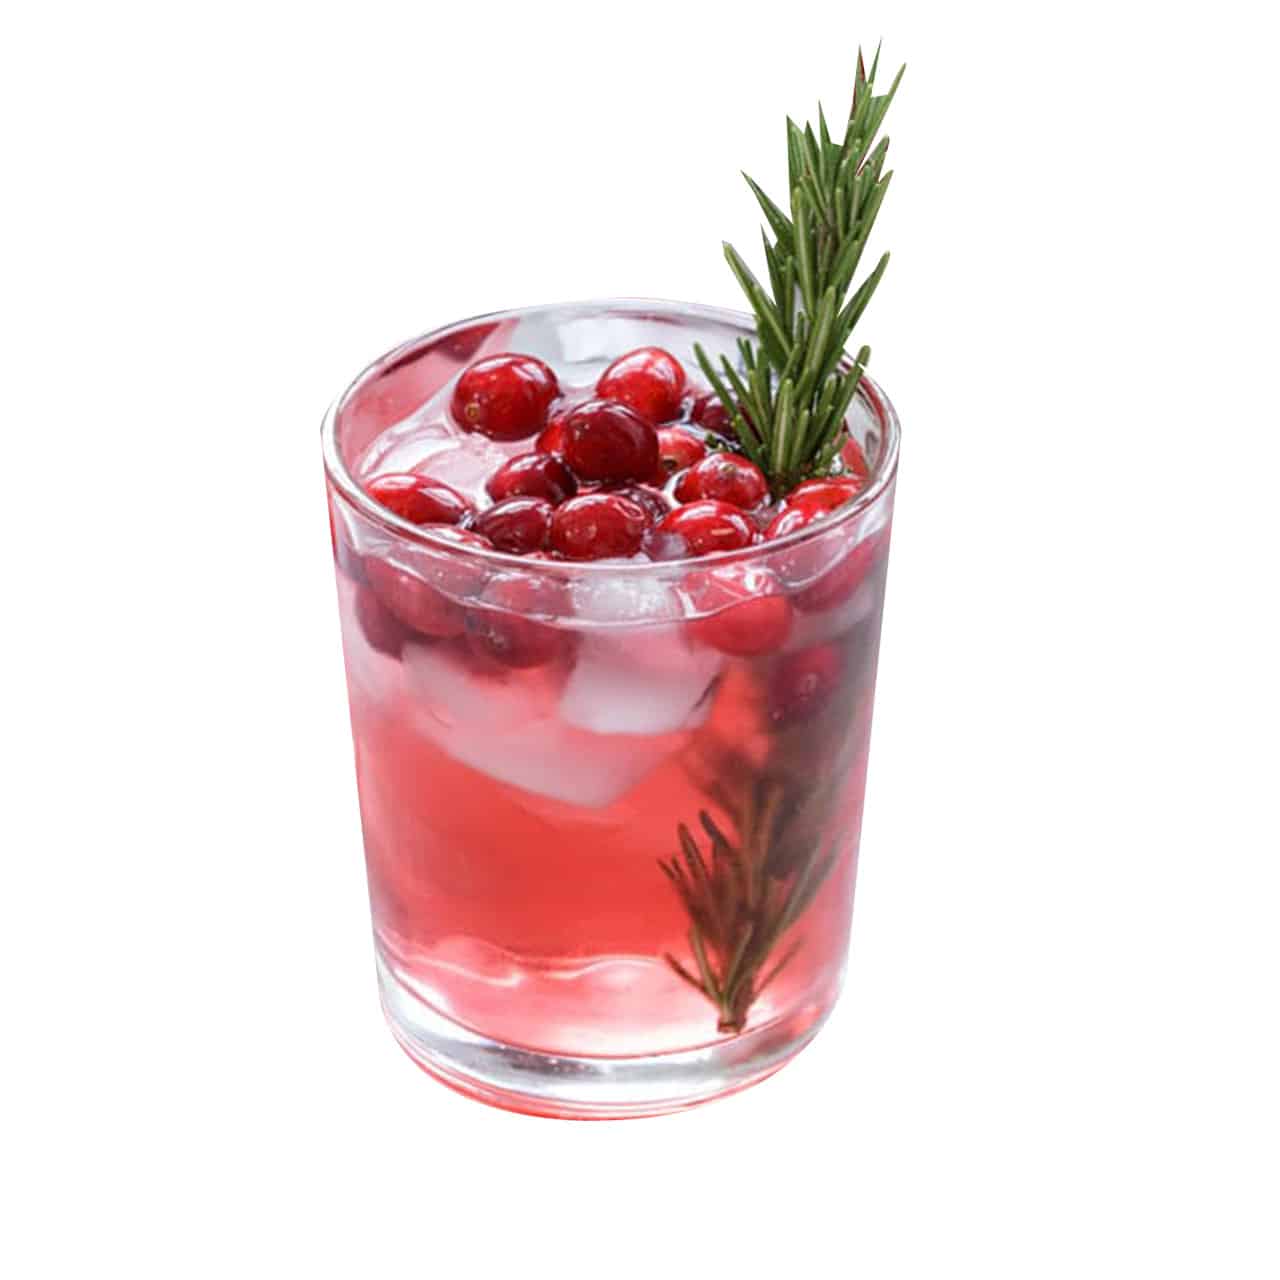 Spiced Cranberry Gimlet - 1.5oz Gin, .75oz Cranberry Spiced Syrup, .75oz Lime Juice (Cranberries & Rosemary Not Included)